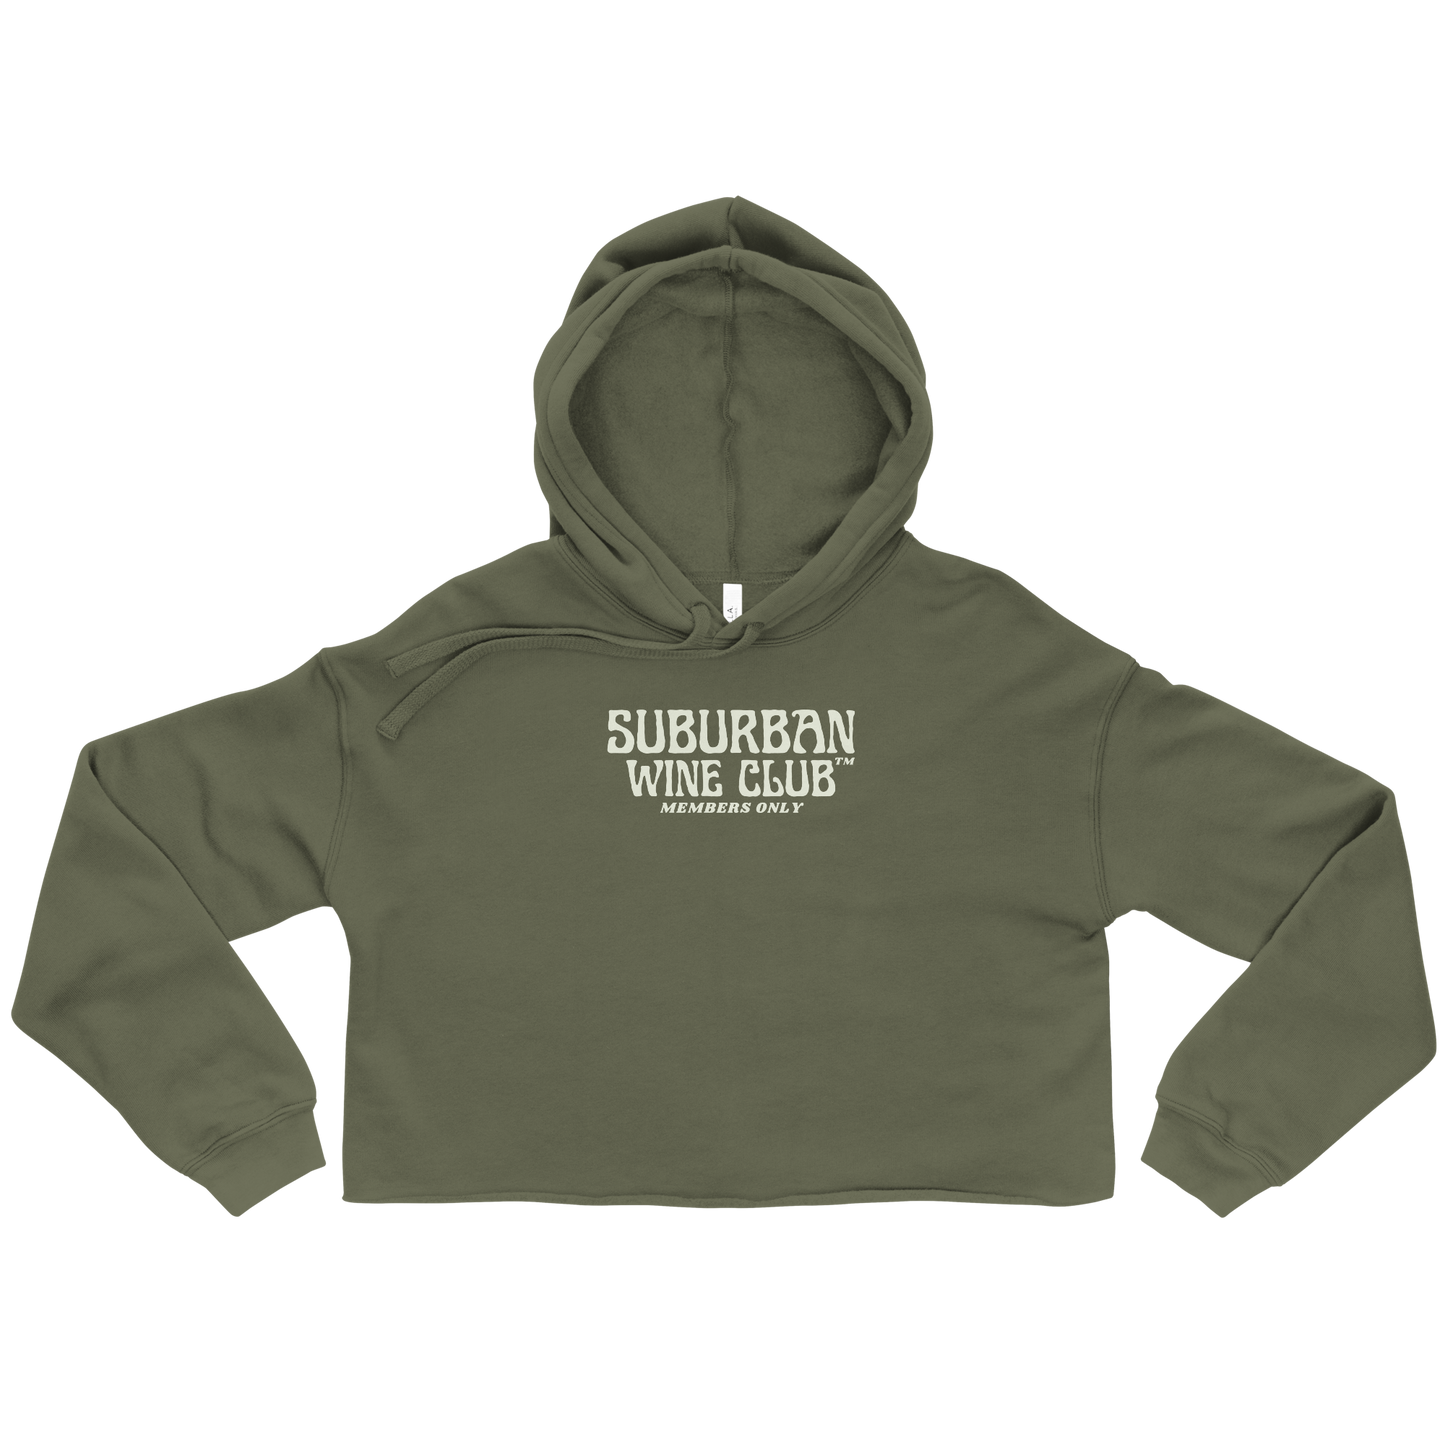 Suburban WIne Club™ Women's Cropped Hoodie | Bella + Canvas 7502 Front